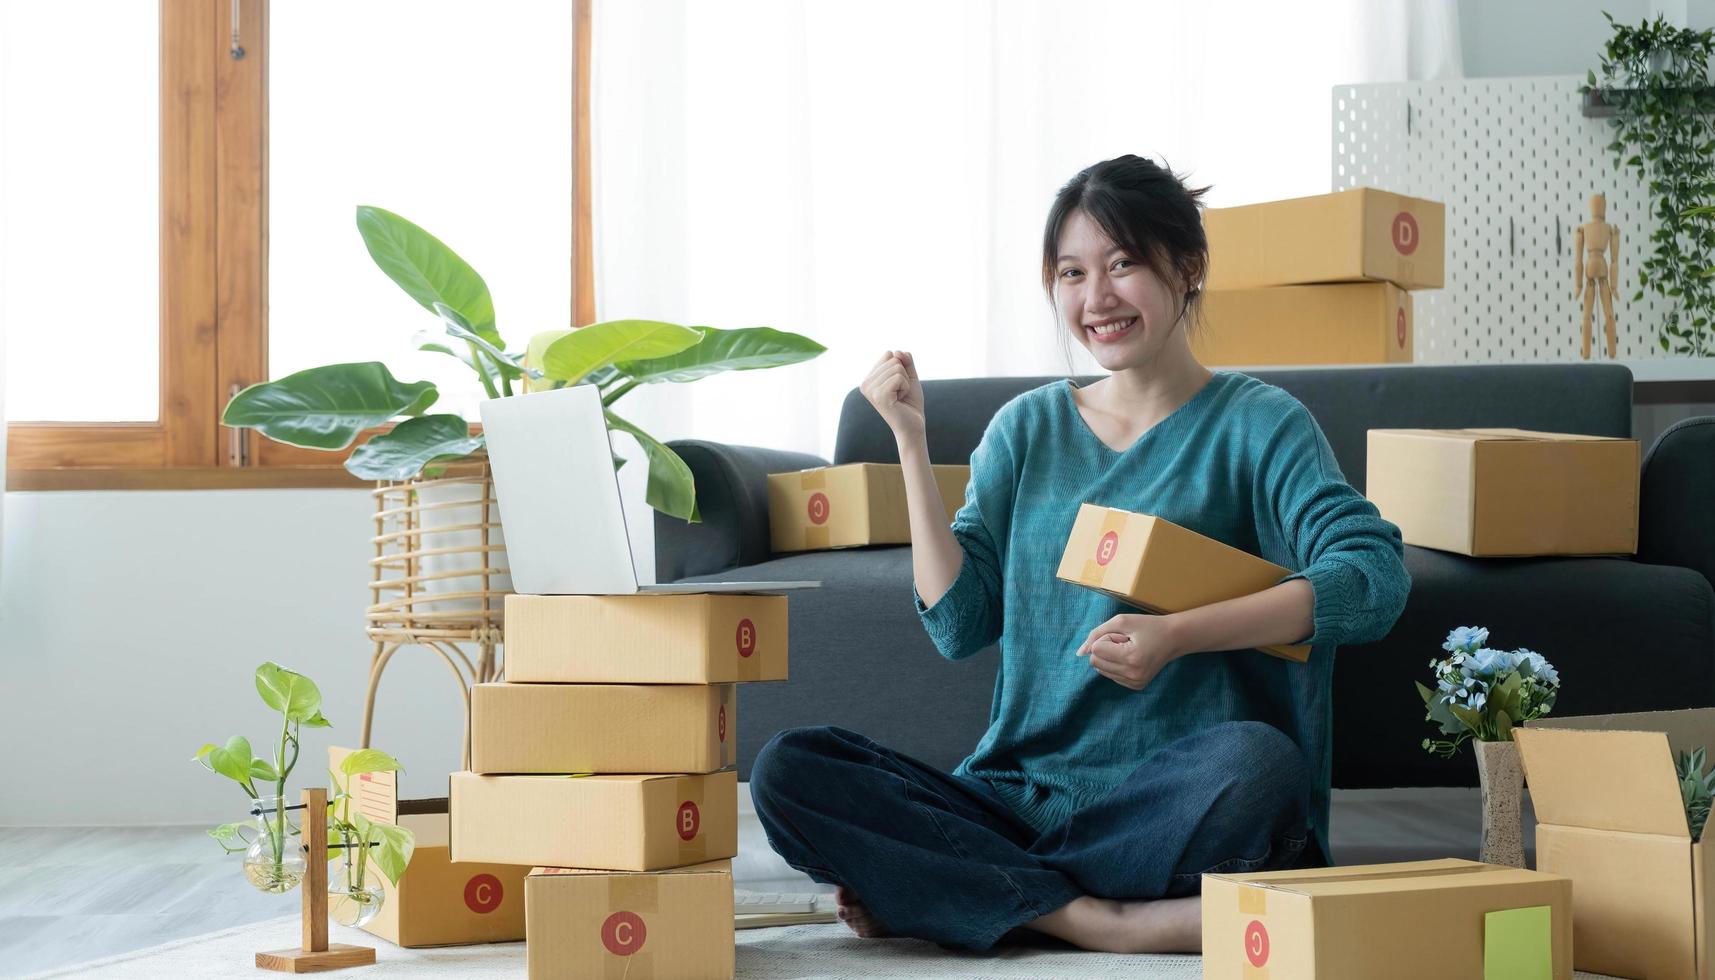 Portrait of Starting small businesses SME owners female entrepreneurs working on receipt box and check online orders to prepare to pack the boxes, sell to customers, SME business ideas online. photo